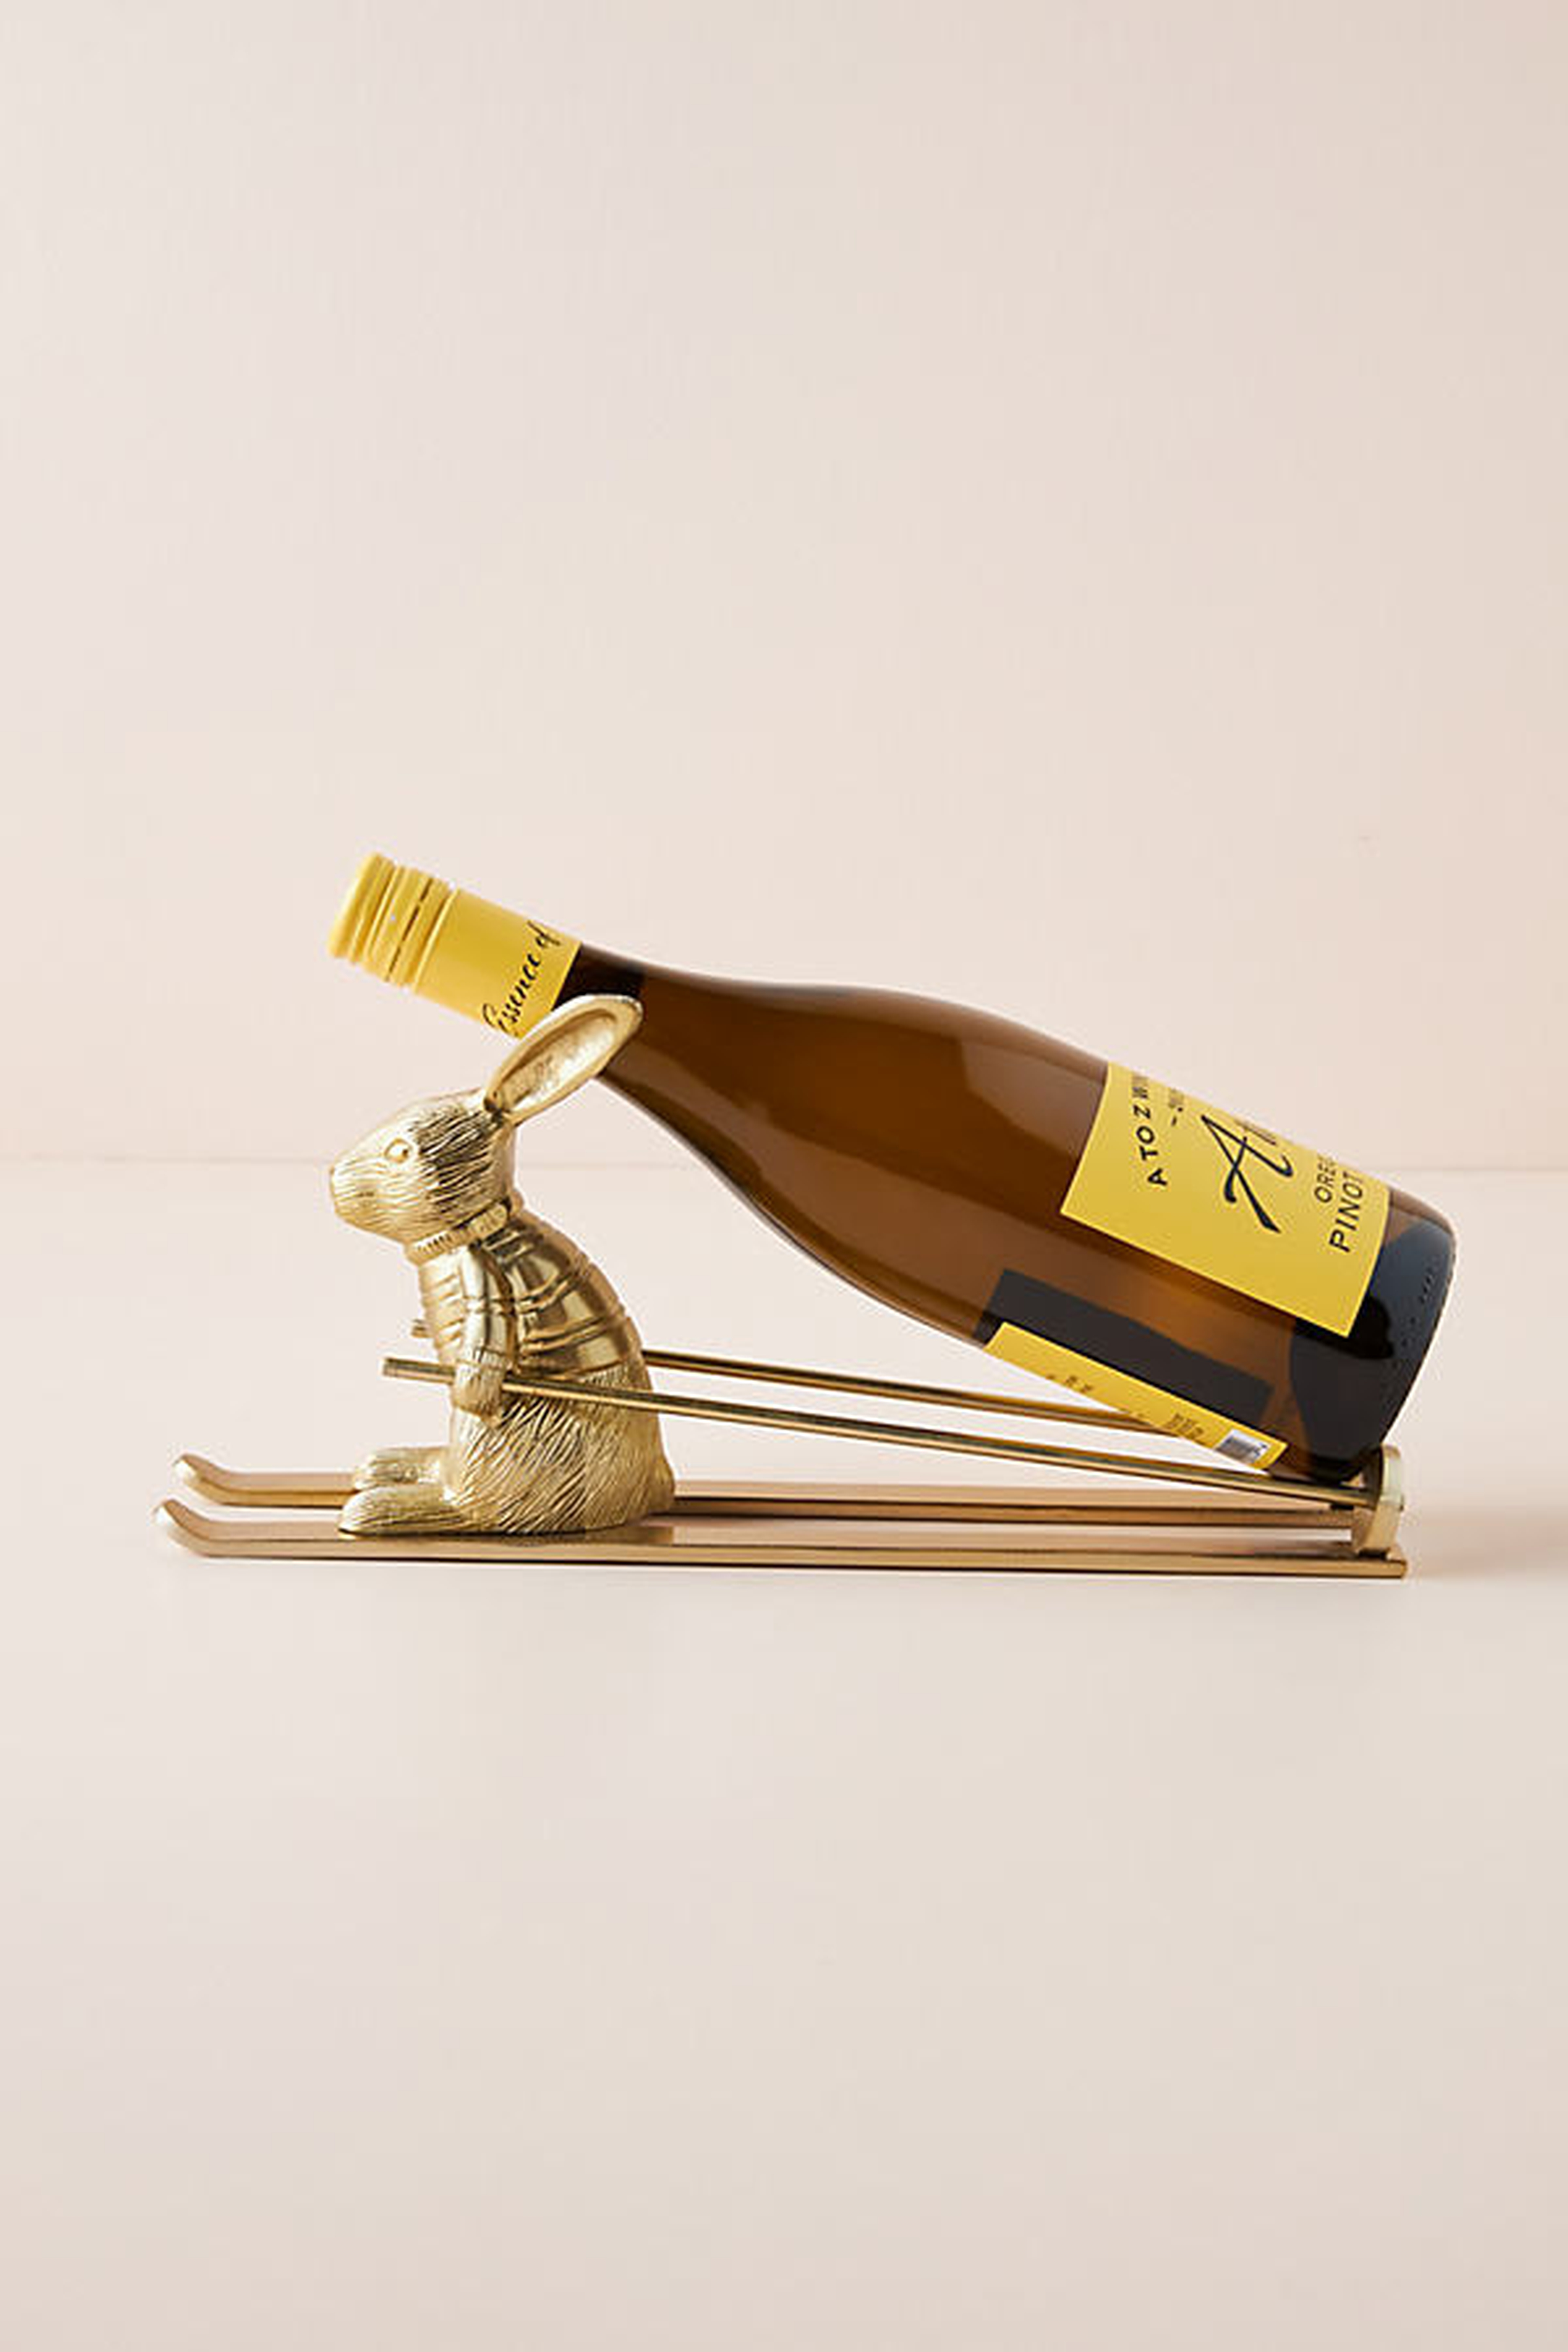 Skiing Hare Wine Holder By Anthropologie in Brown - Anthropologie